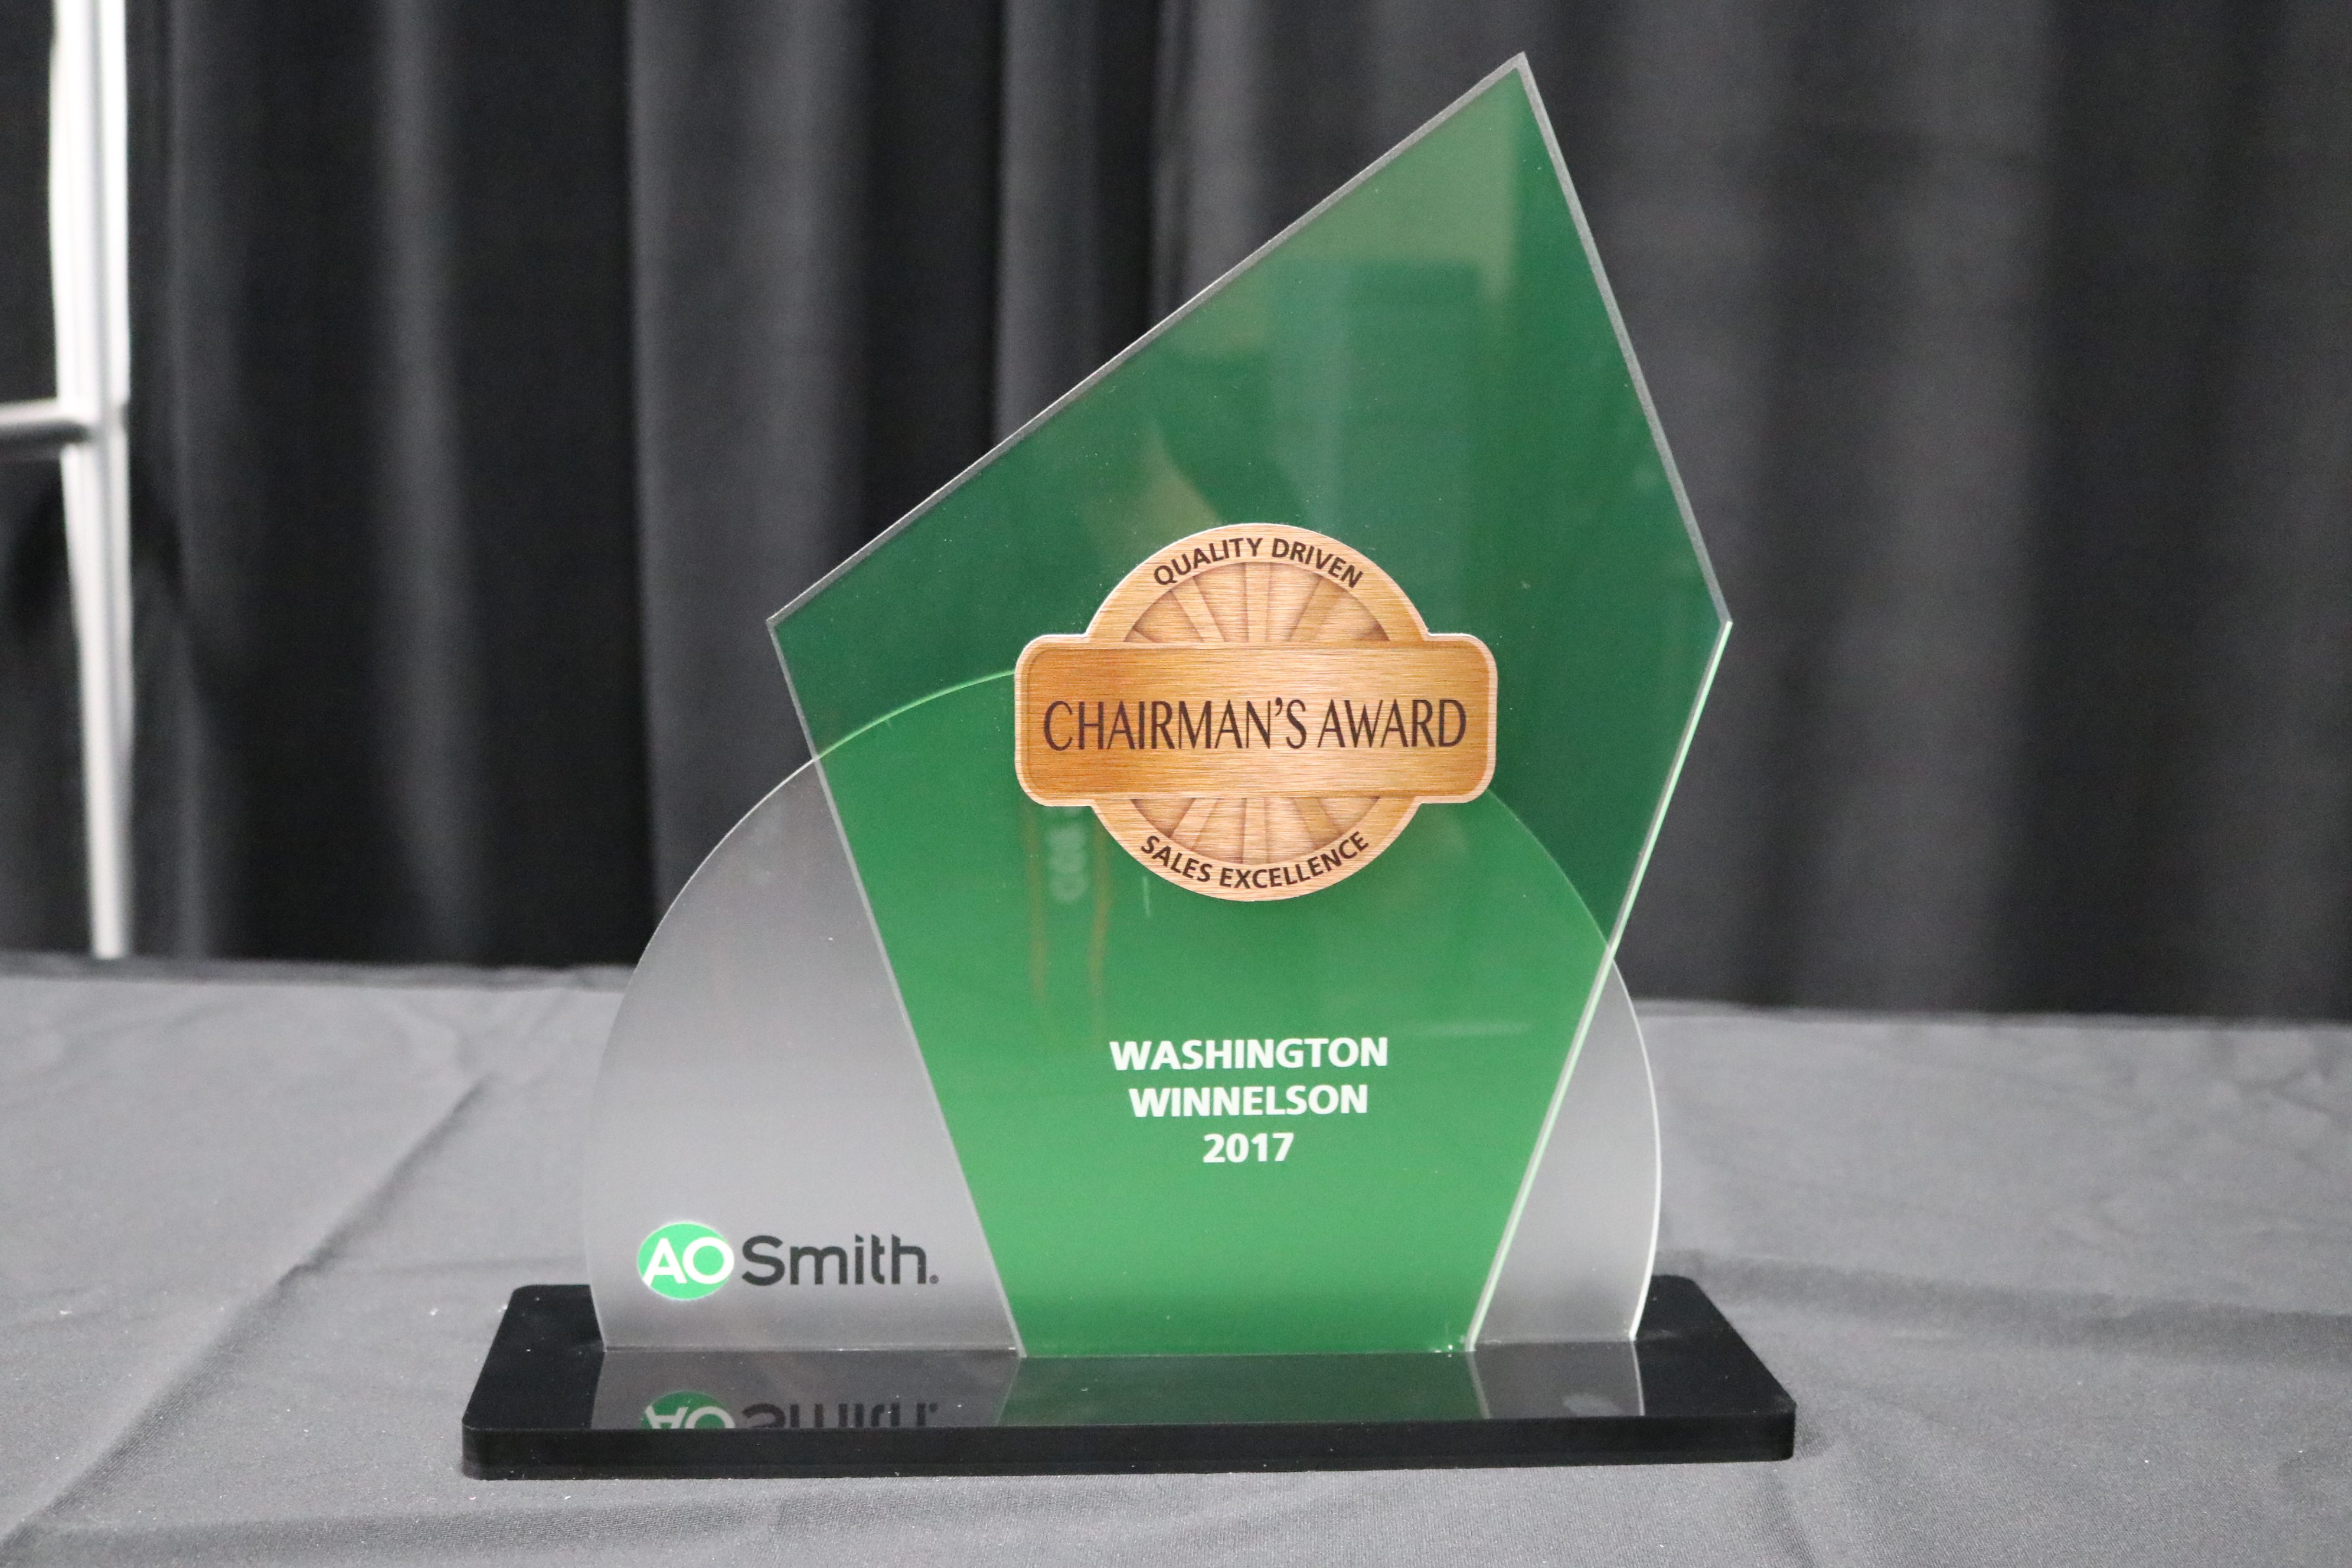 Acrylic award with unique shapes cut out, frosted finish, and green translucent print.